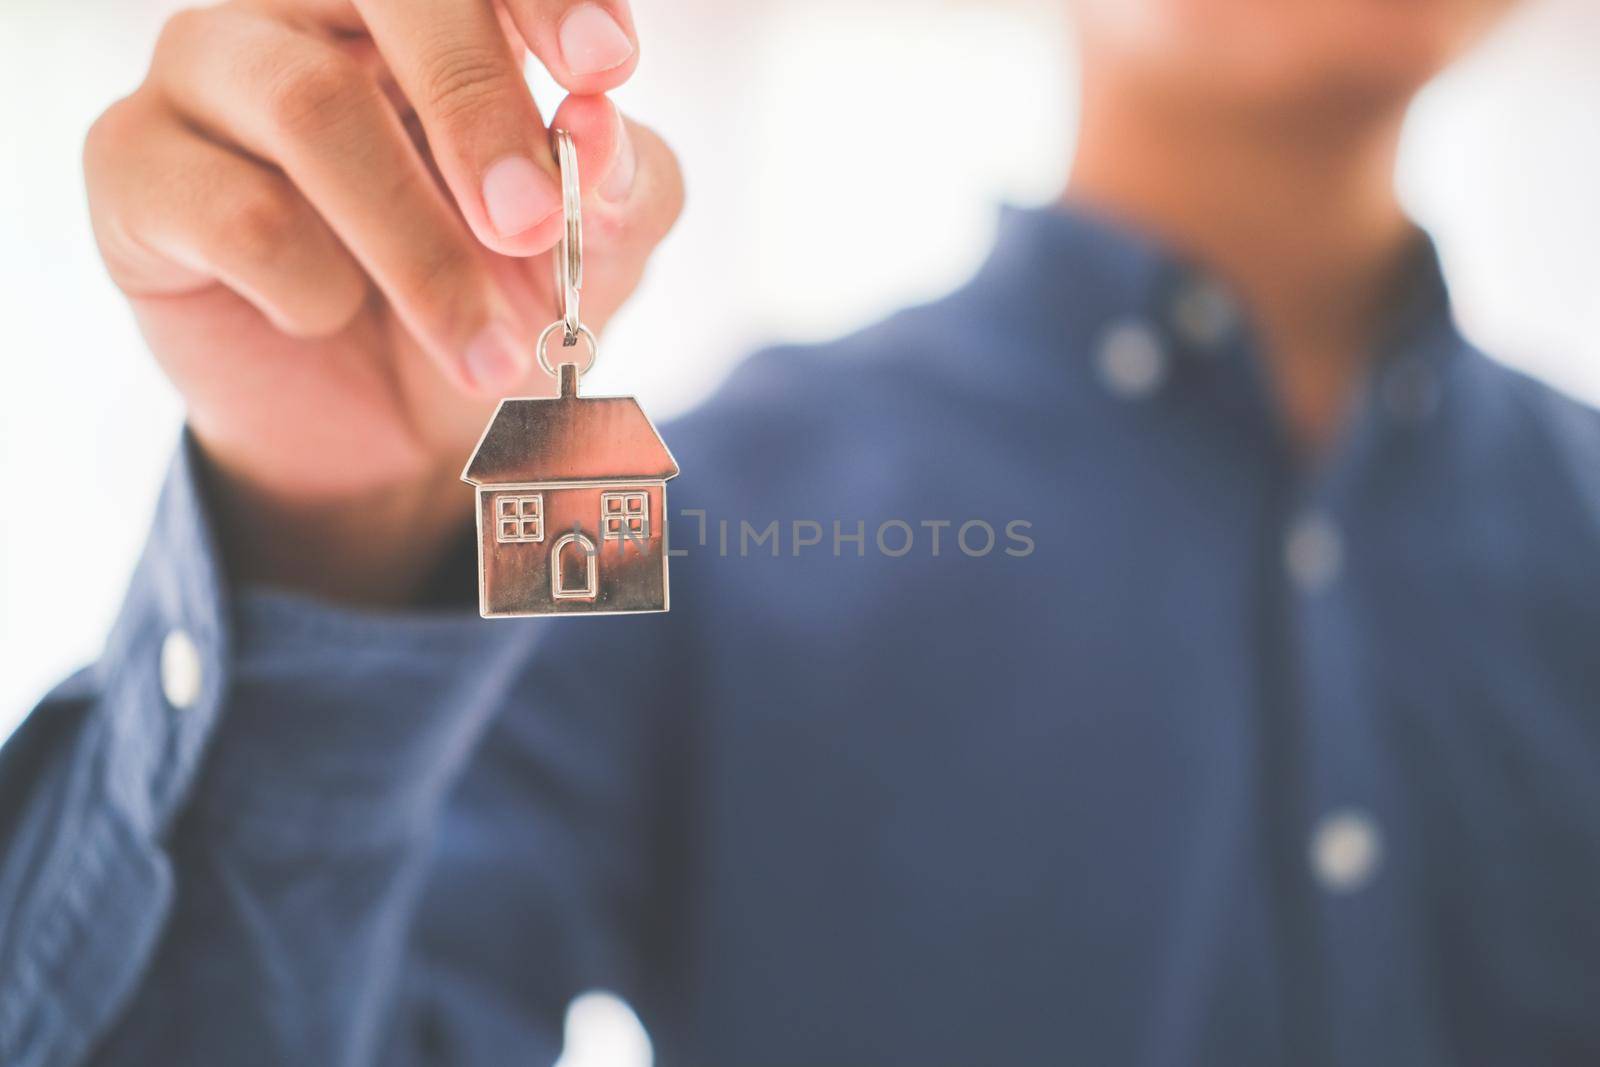 Real estate agent with house model and keys.
 by ijeab